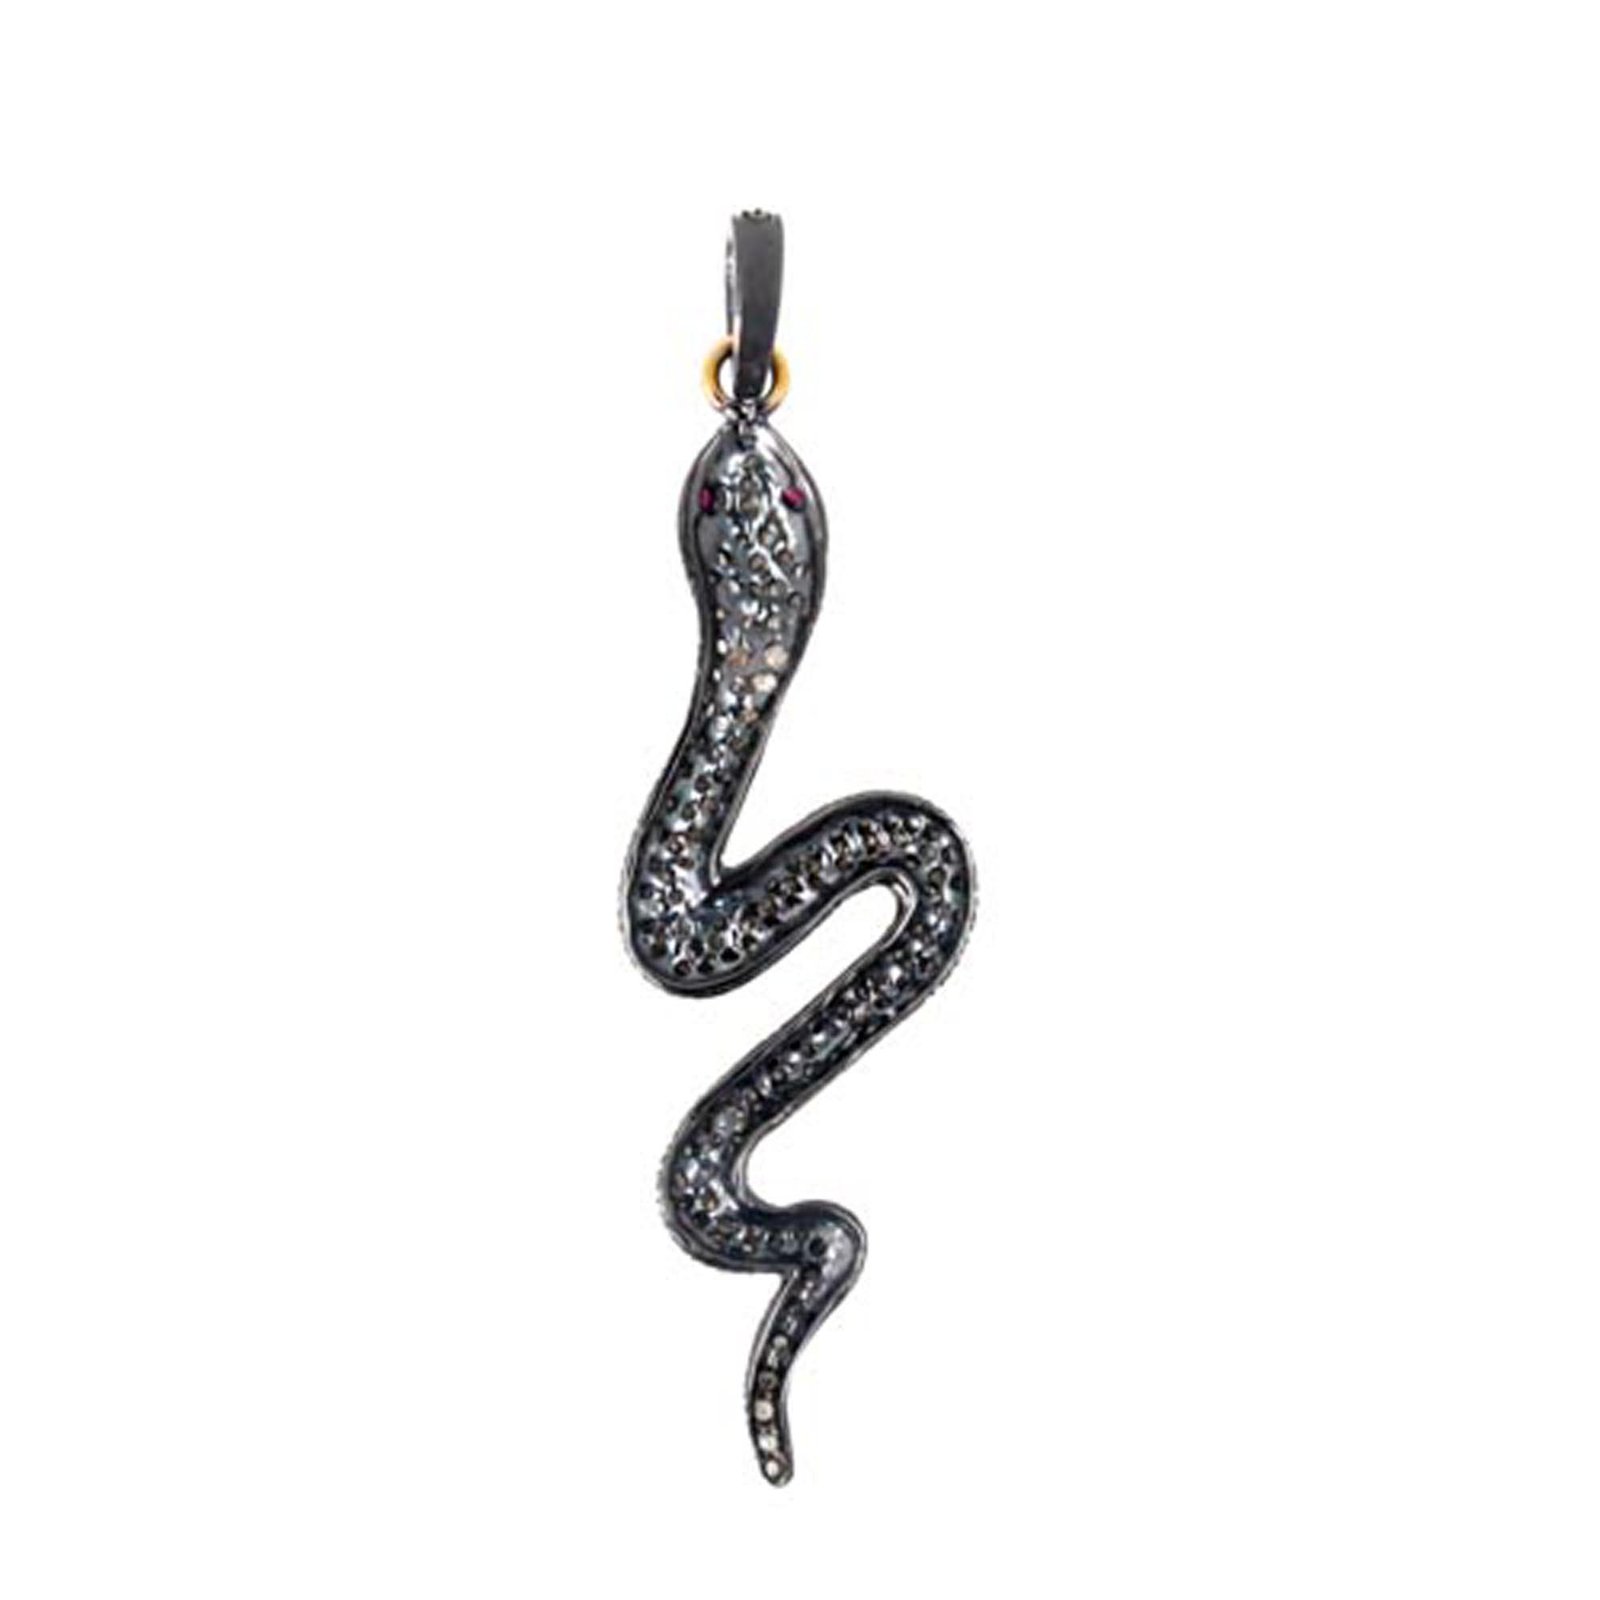 Solid gold & silver diamond snake pendant vintage jewelry